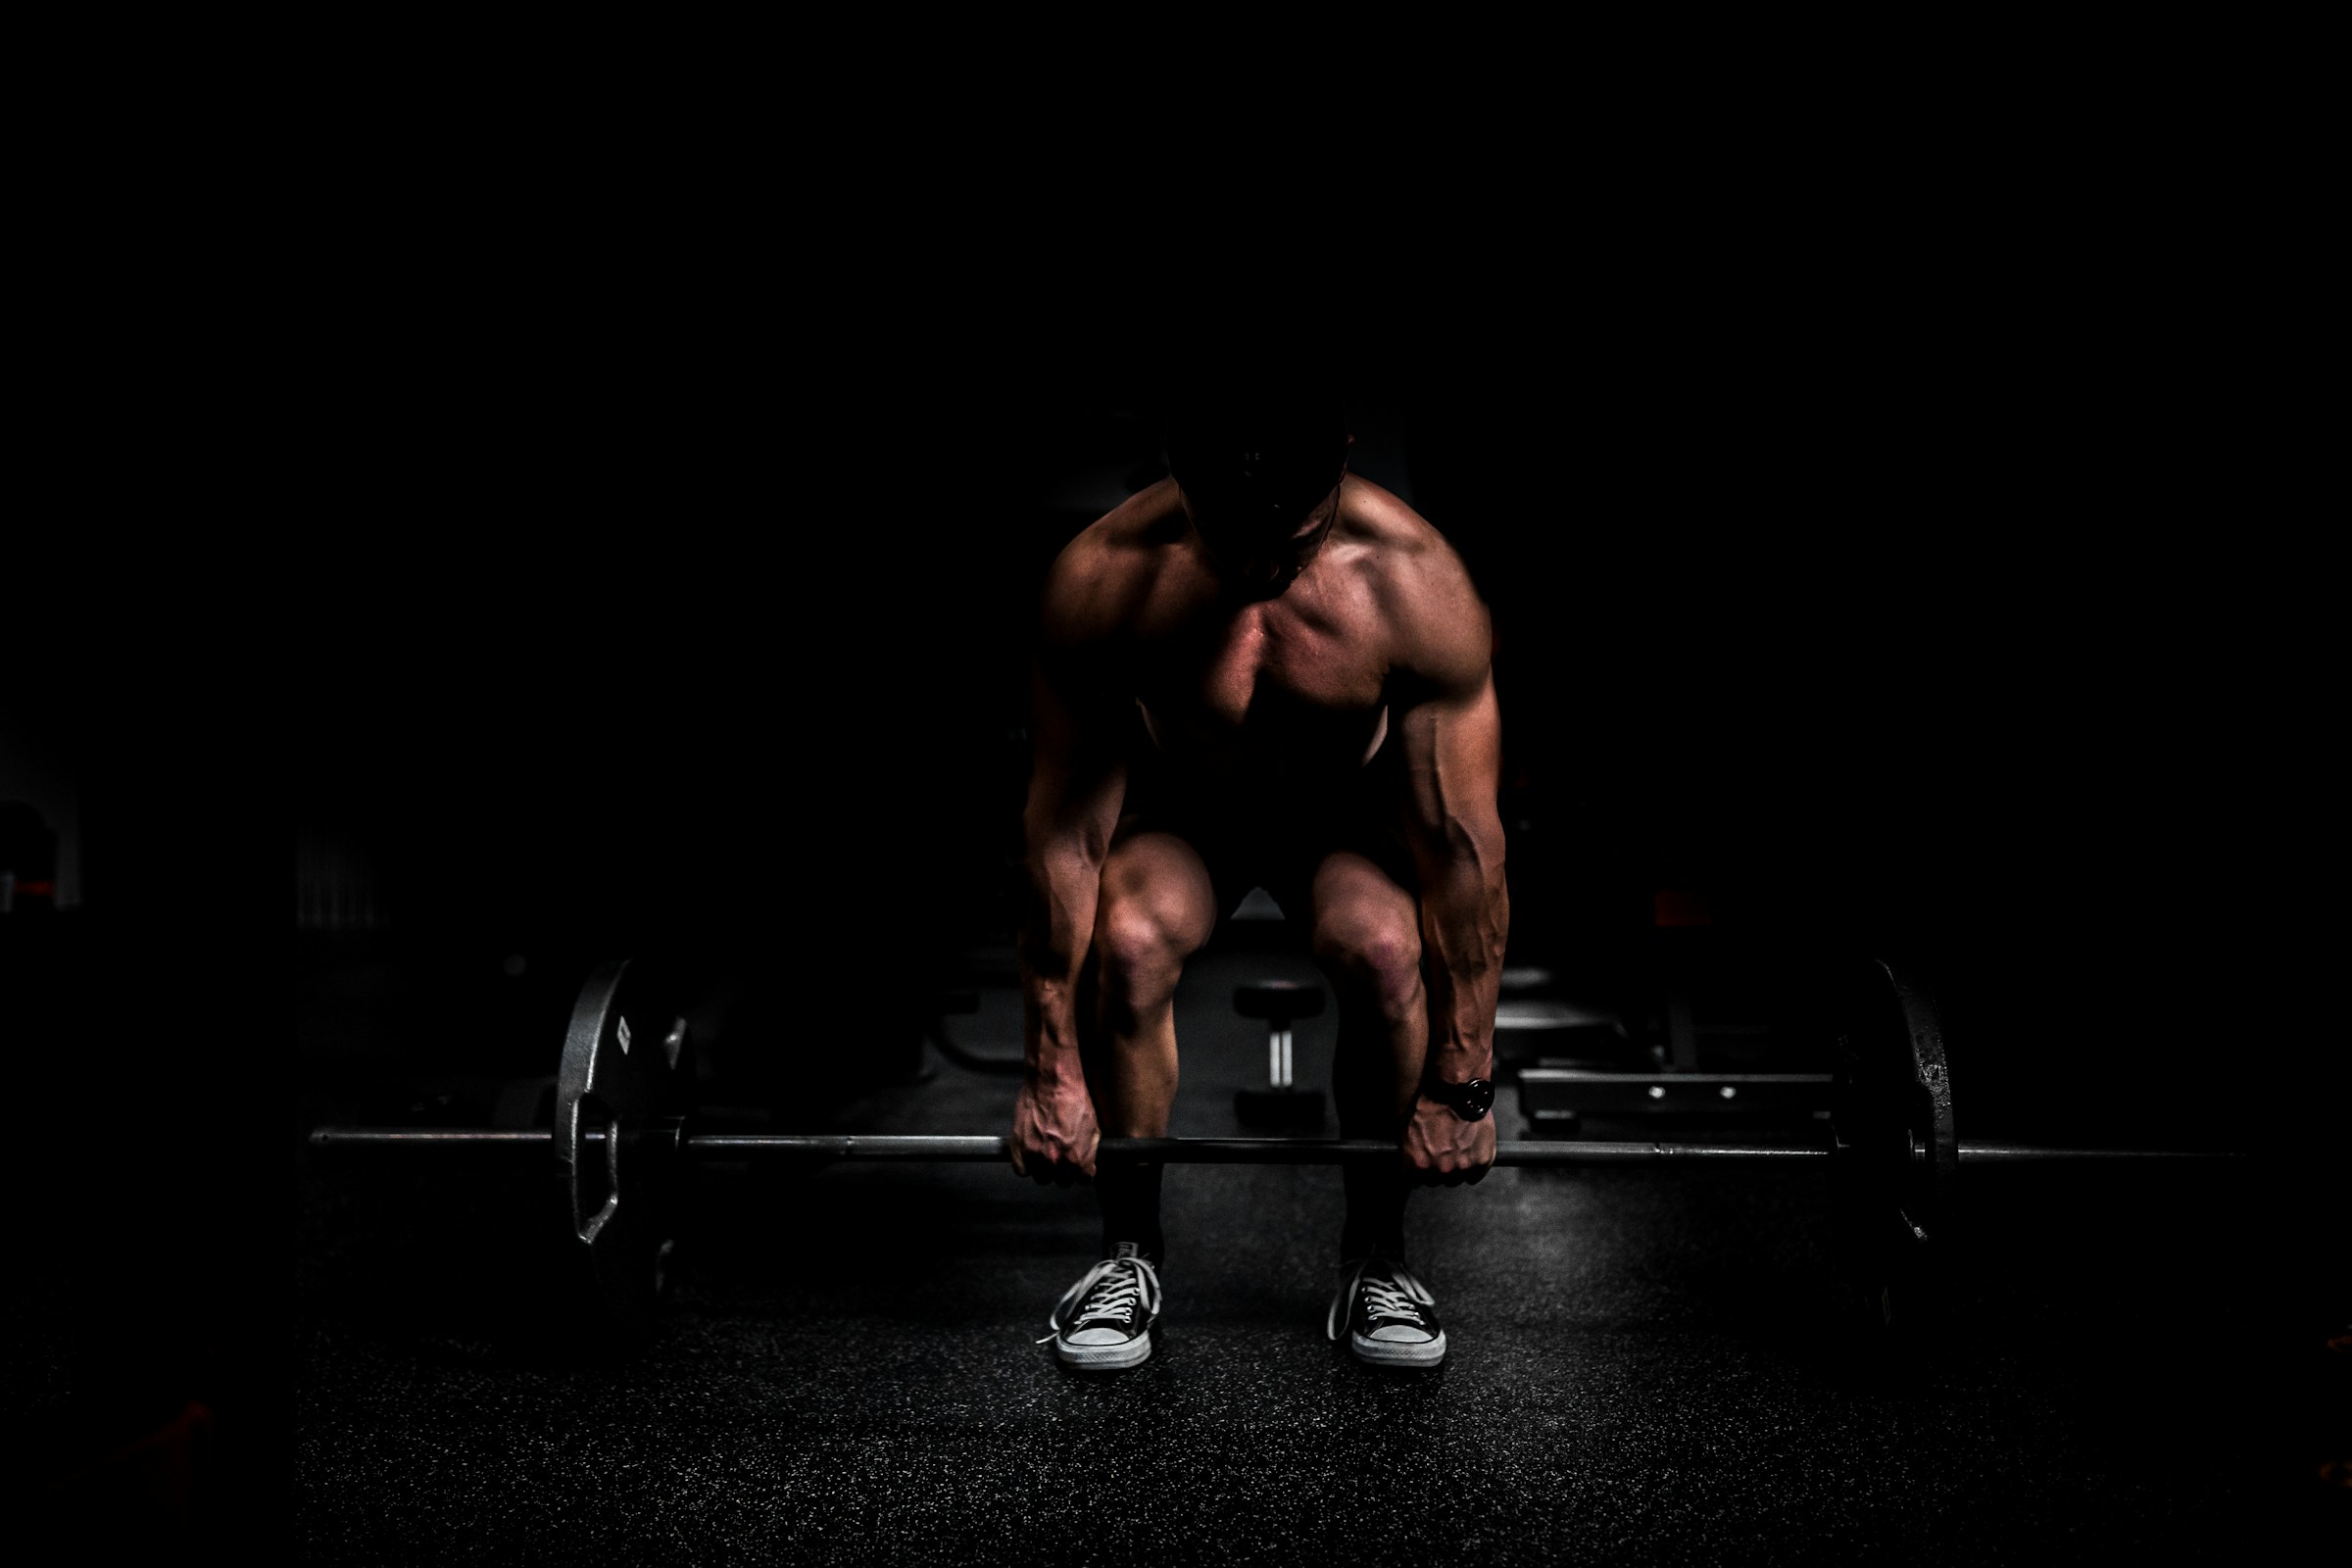 Shirtless man doing a deadlift weight lifting exercise with black background